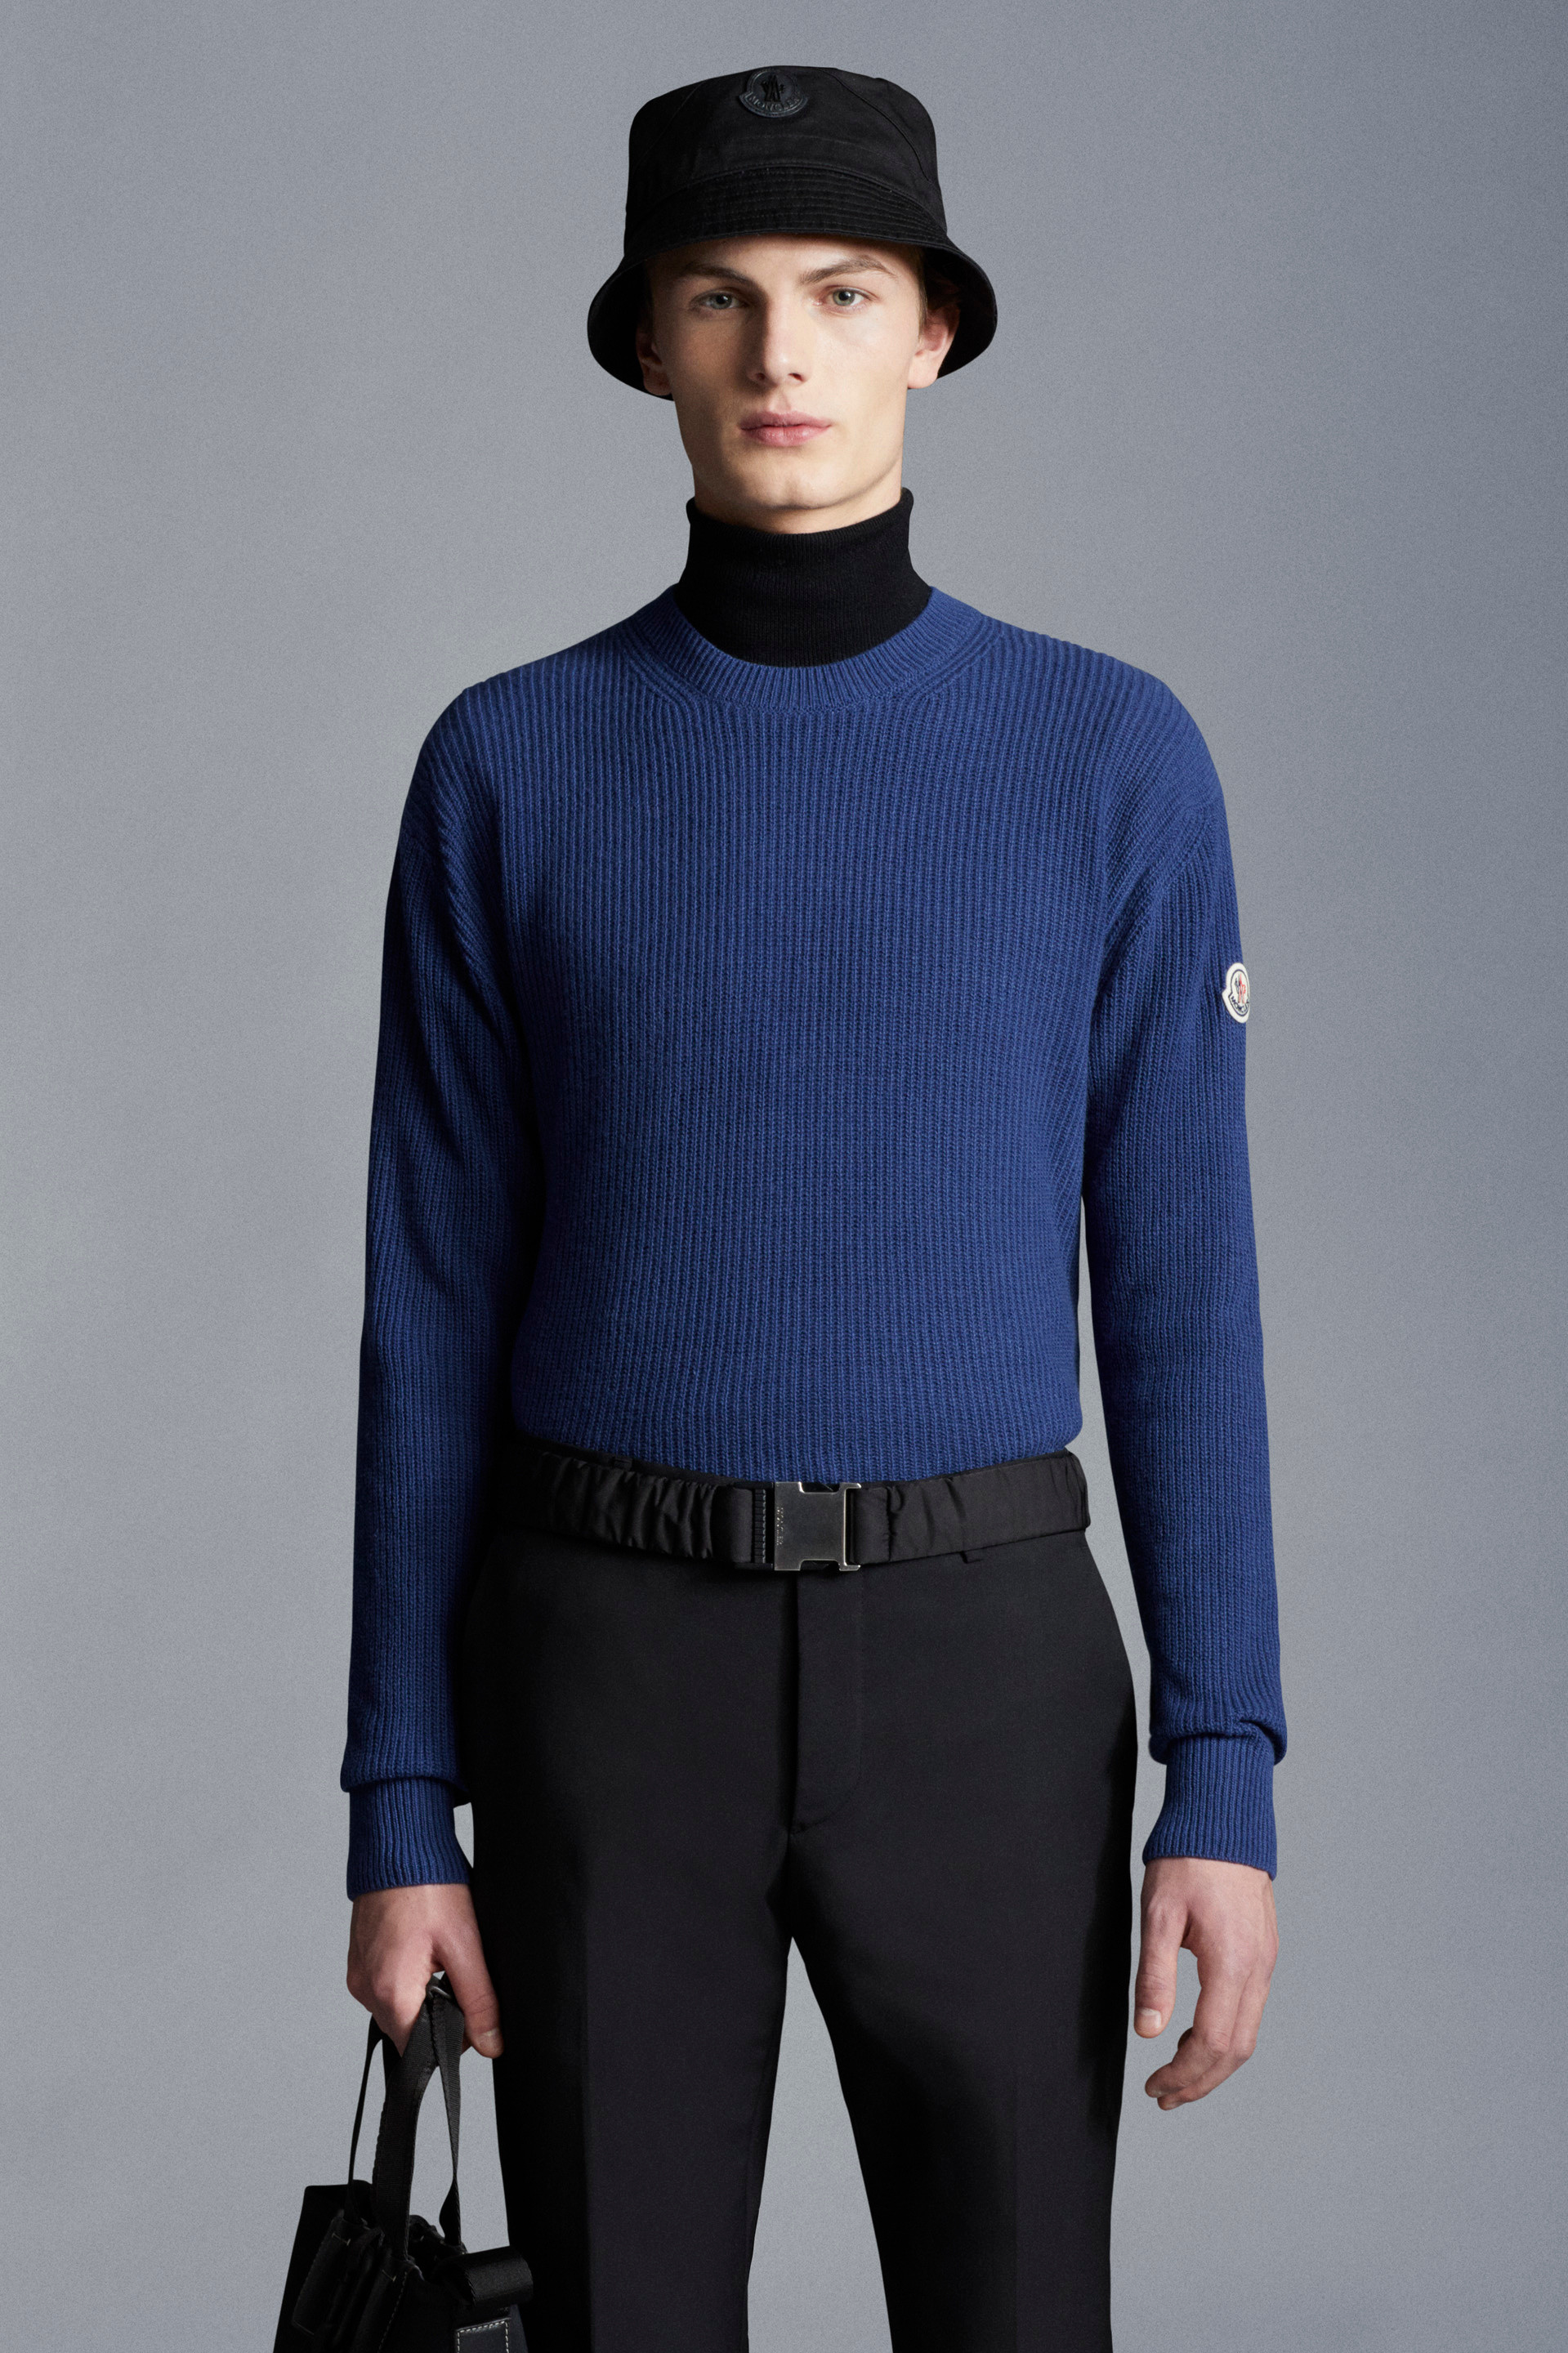 Moncler Genius 3 Moncler Grenoble in Blue Womens Clothing Jumpers and knitwear Turtlenecks 